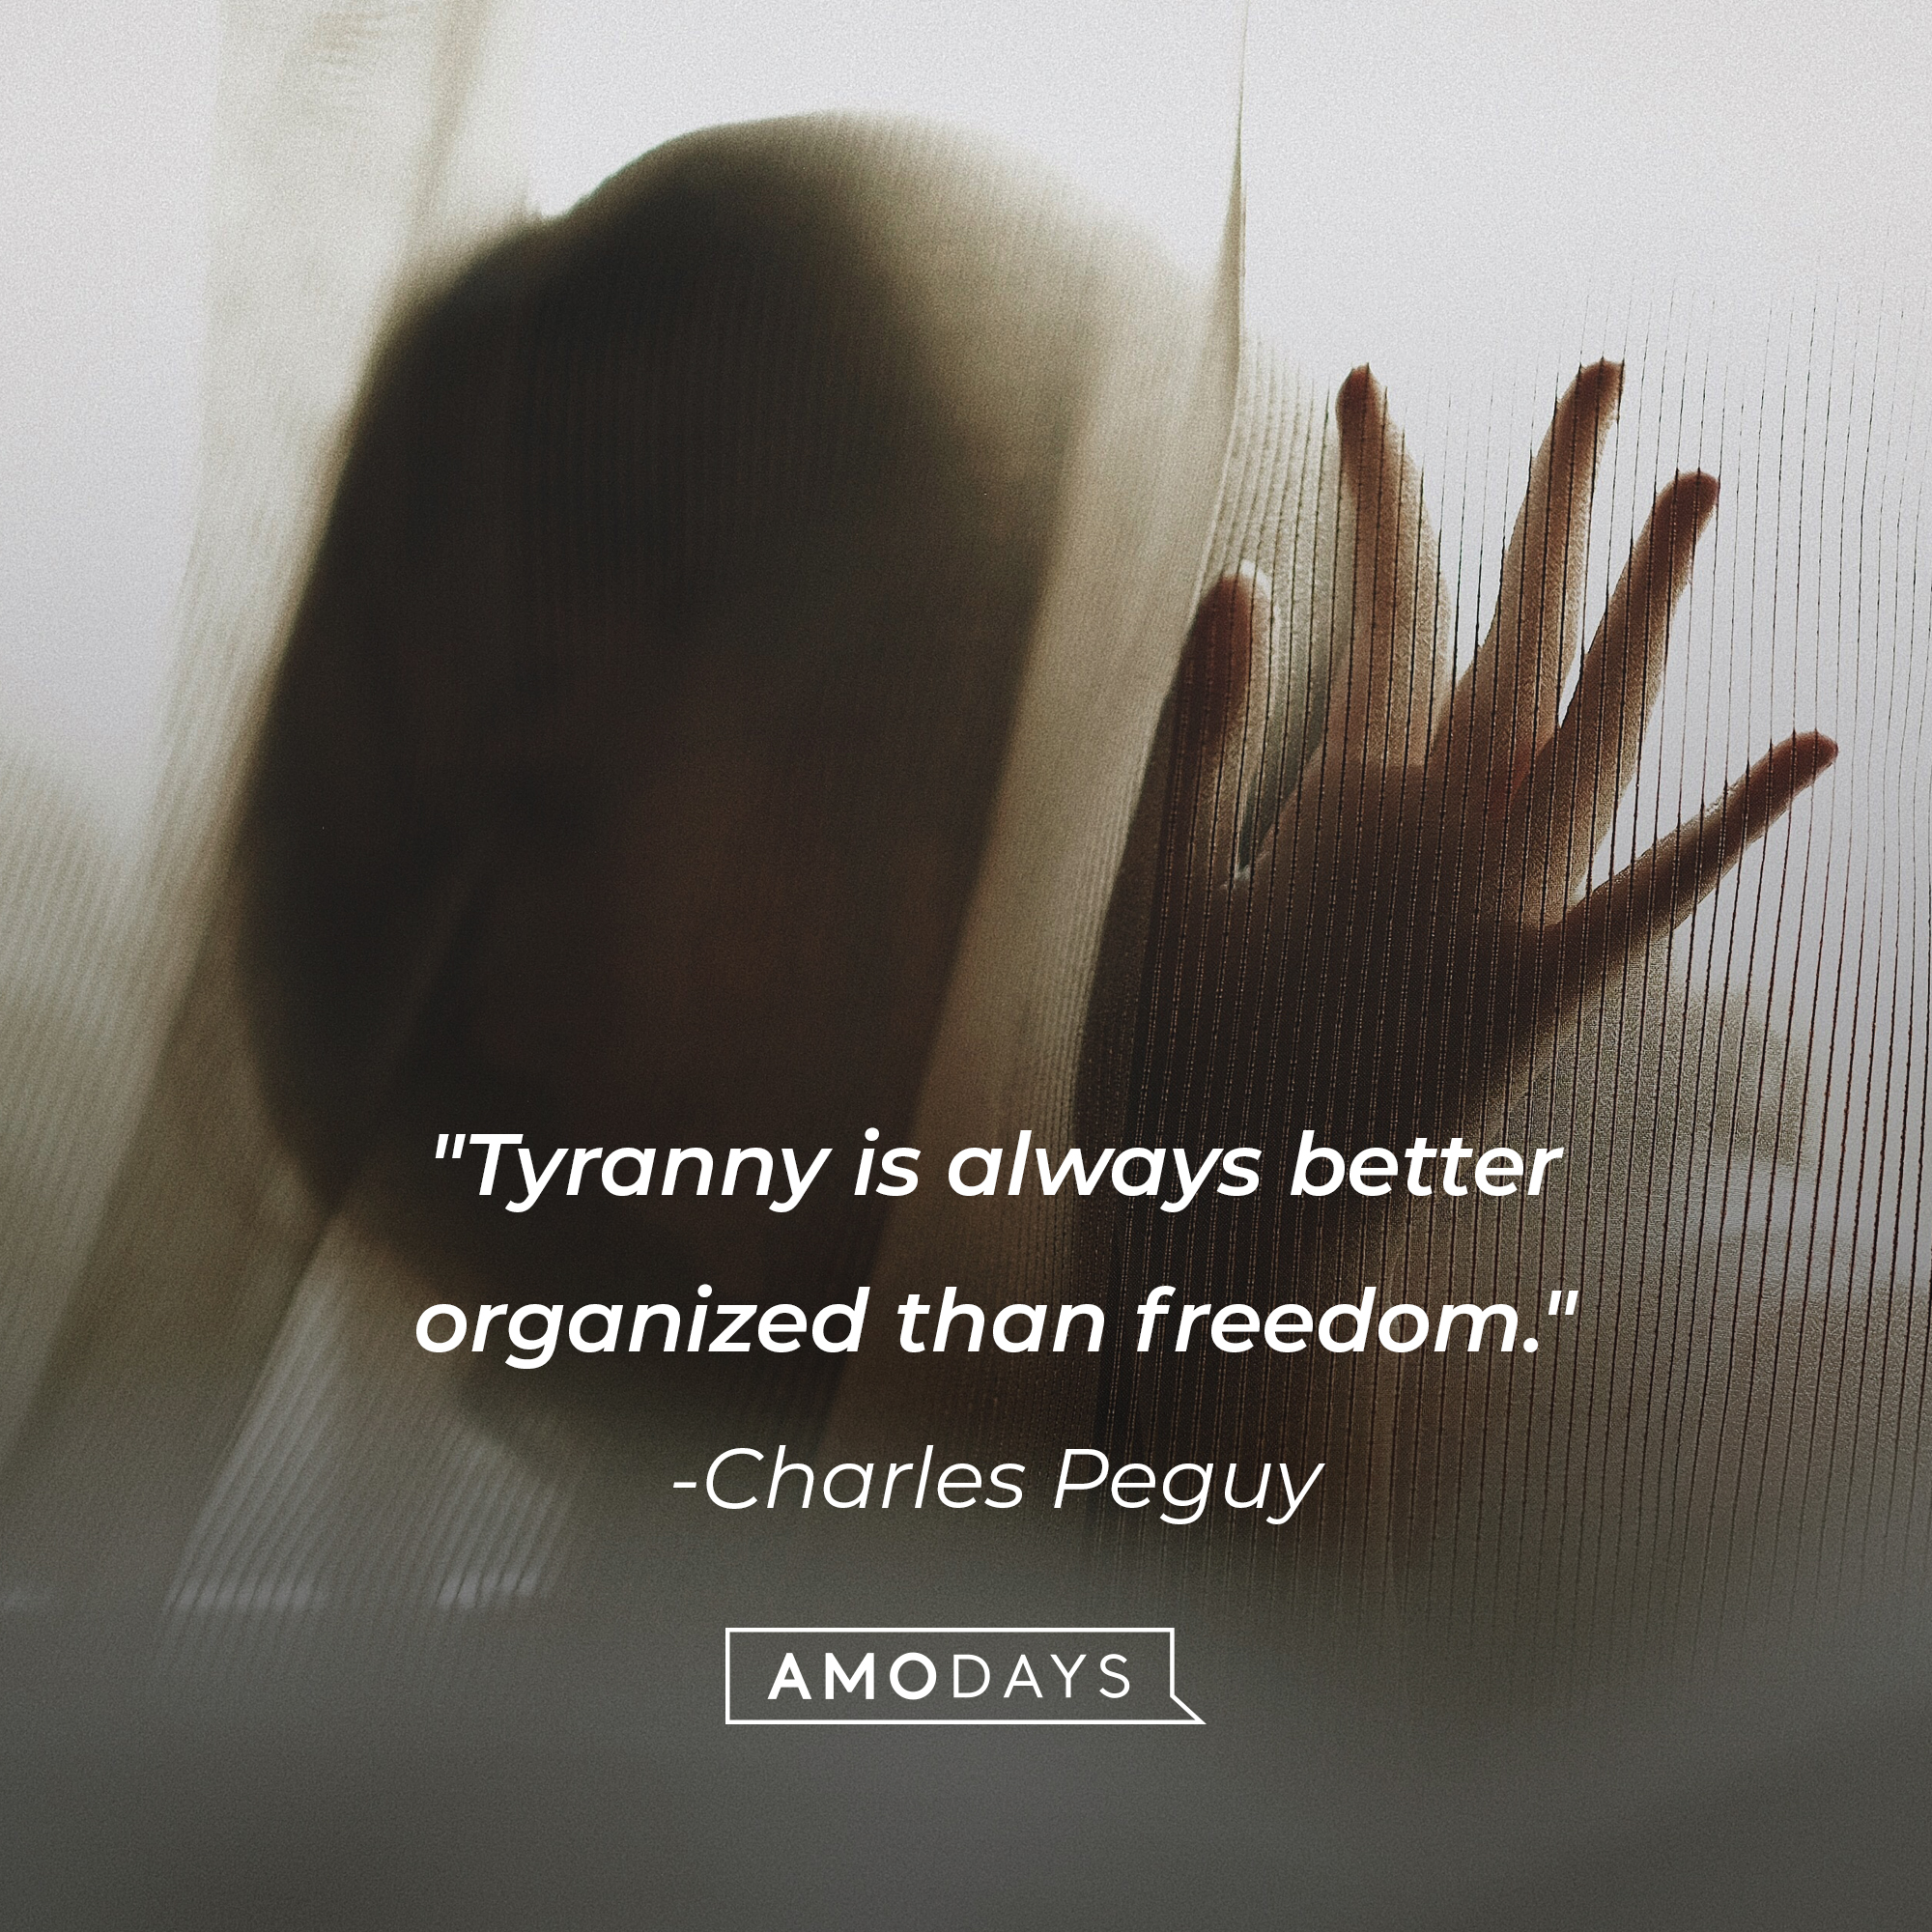 Charles Pegu's quote: "Tyranny is always better organized than freedom." | Image: AmoDays